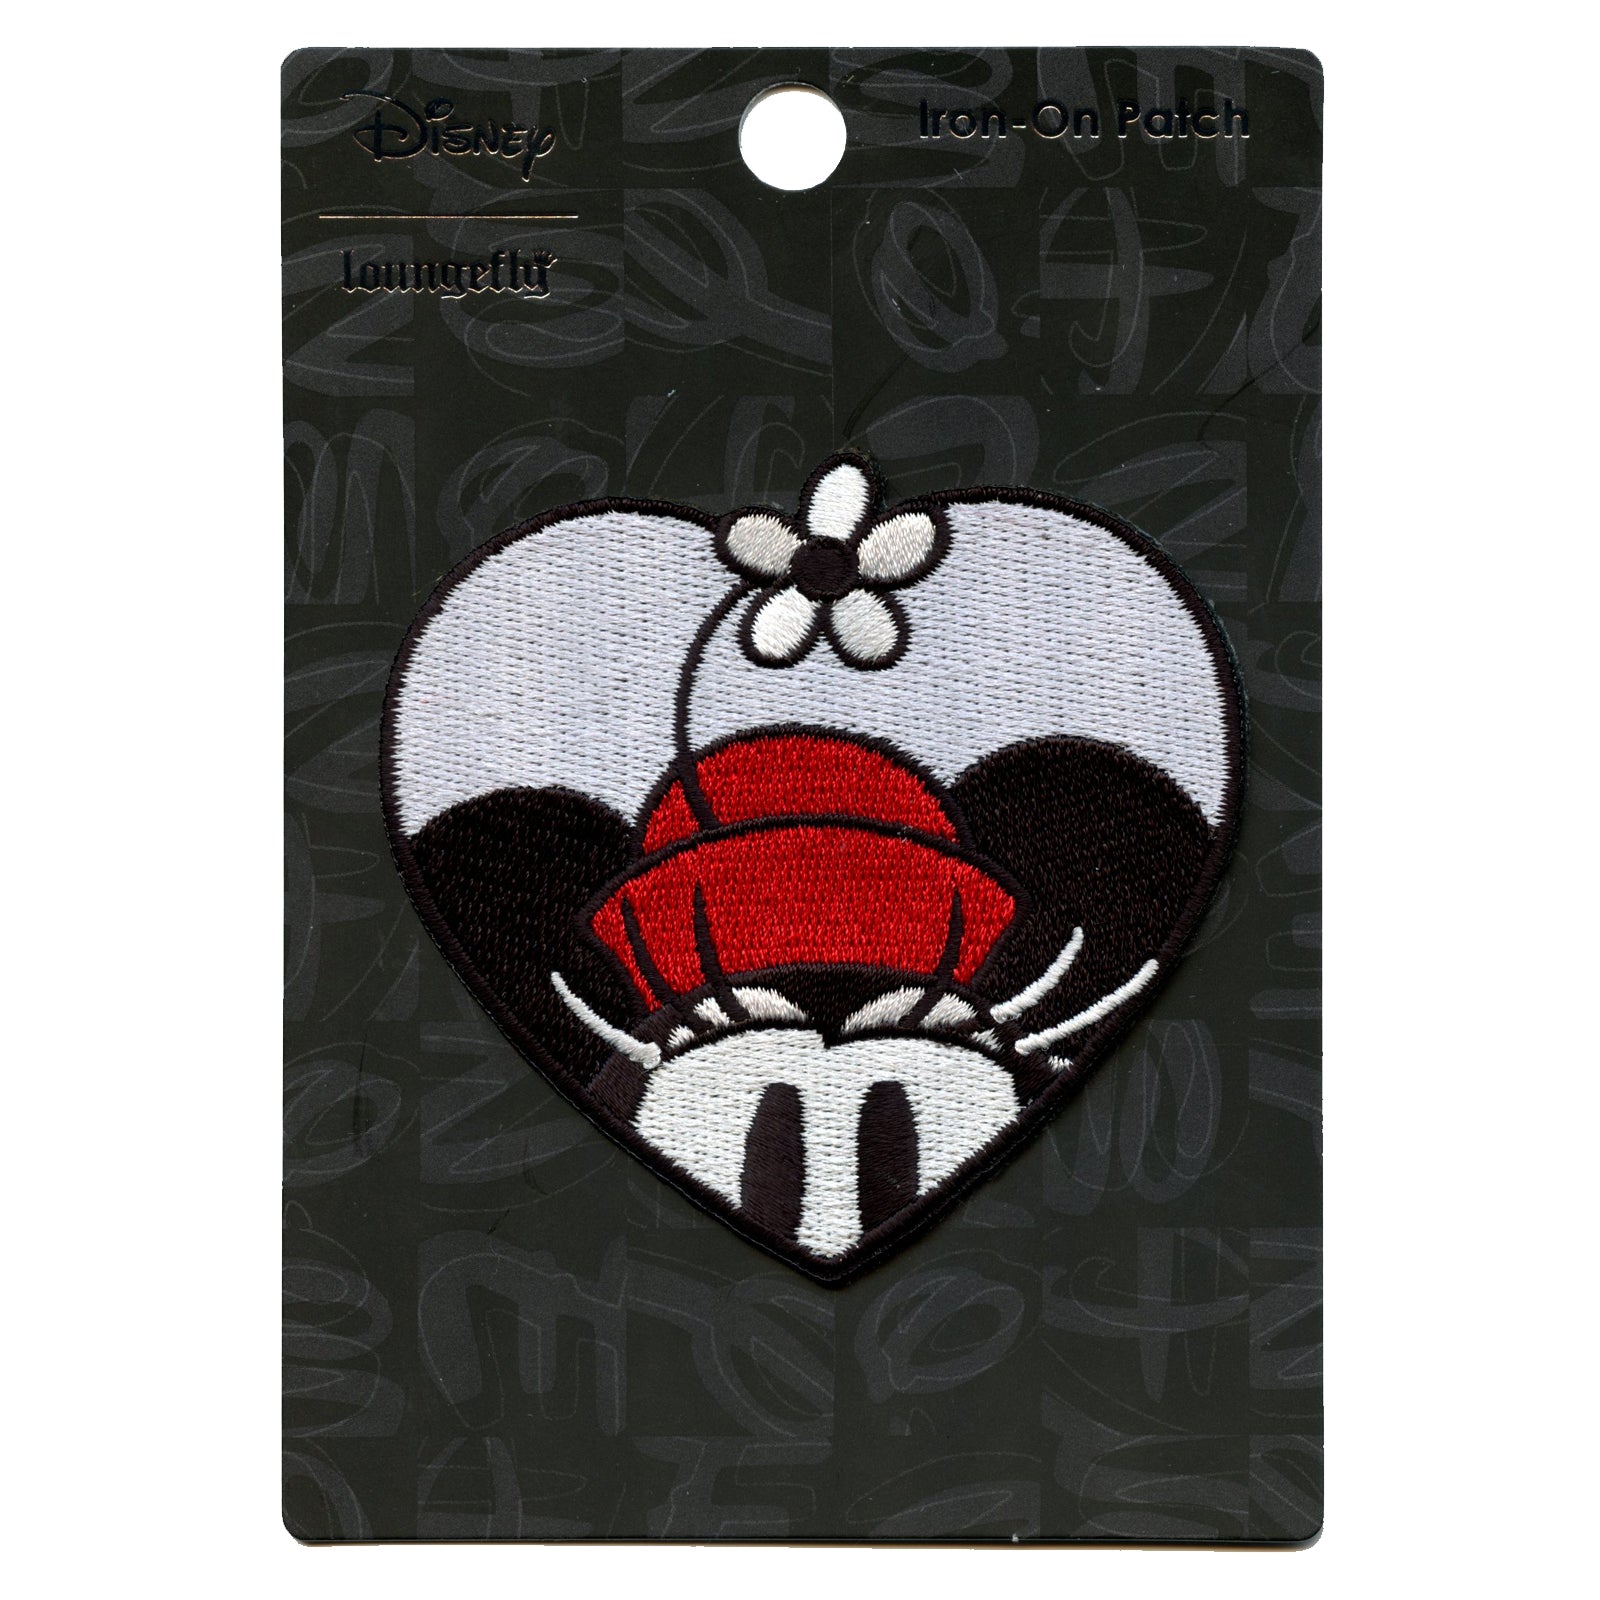 Official Minnie Mouse Classic In Heart Embroidered Iron On Patch 